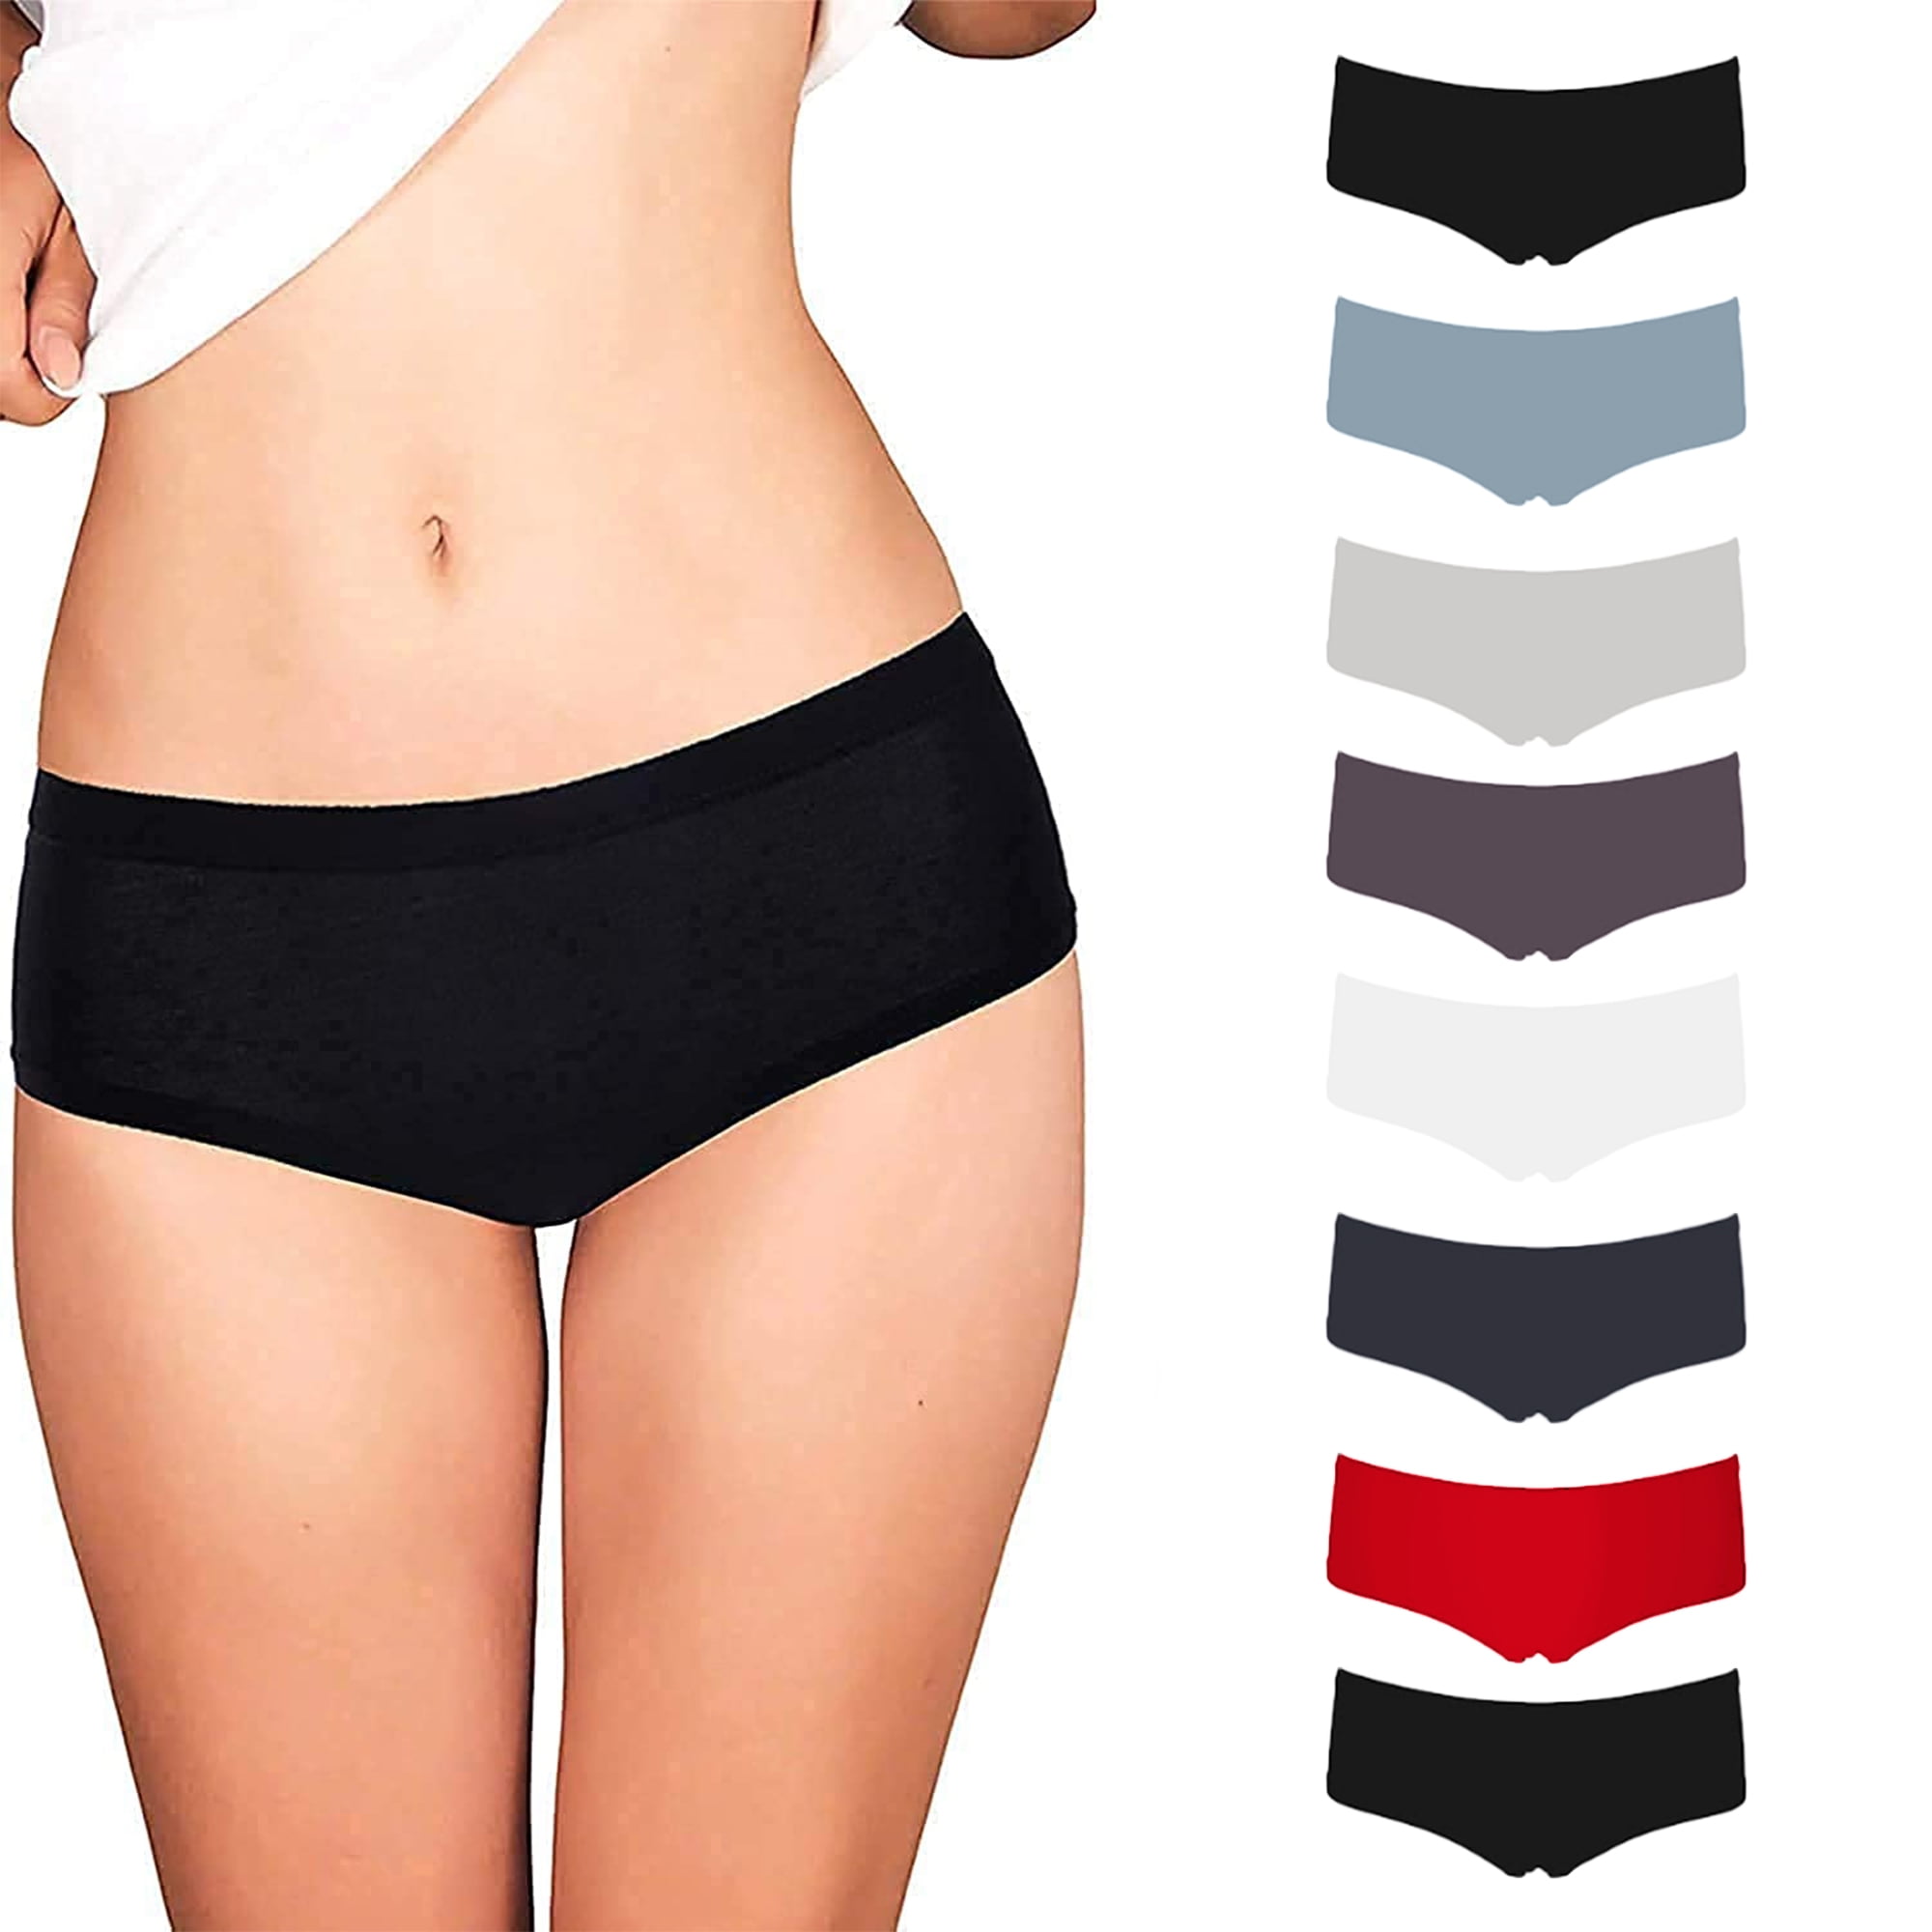 Emprella Cotton Underwear Women Thongs Assorted 5 Pack - No Show Panties,  Seamless Sexy Breathable - multi M - 89 requests